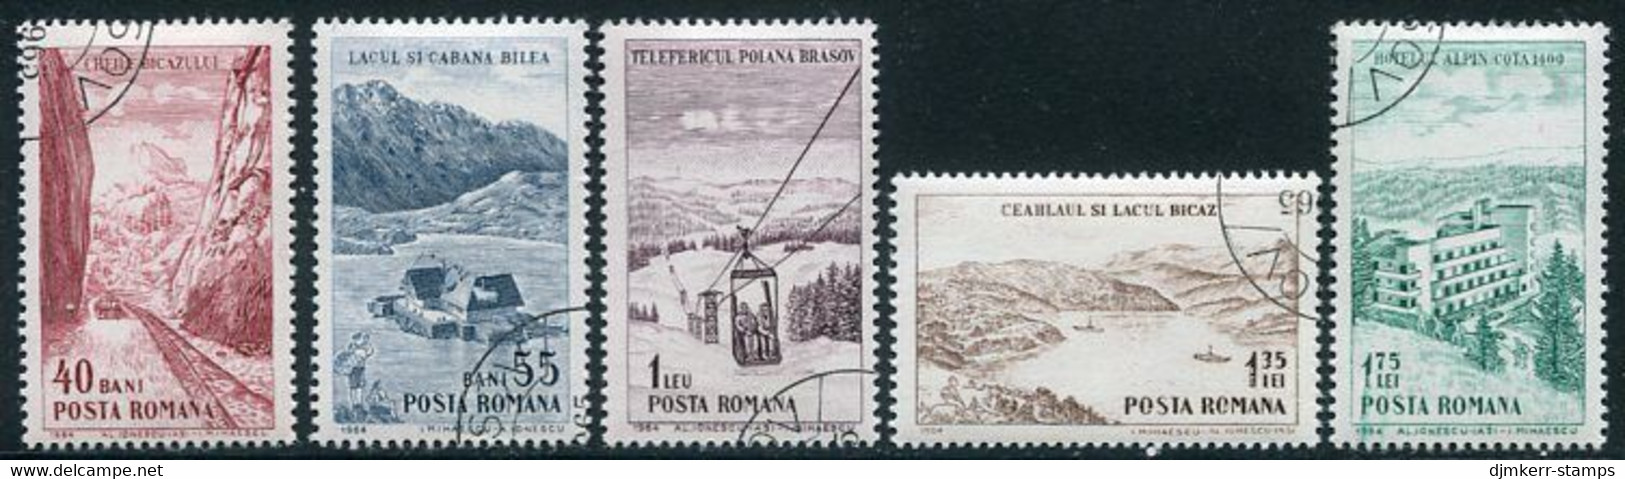 ROMANIA 1964 Tourism  Used.  Michel 2294-98 - Used Stamps